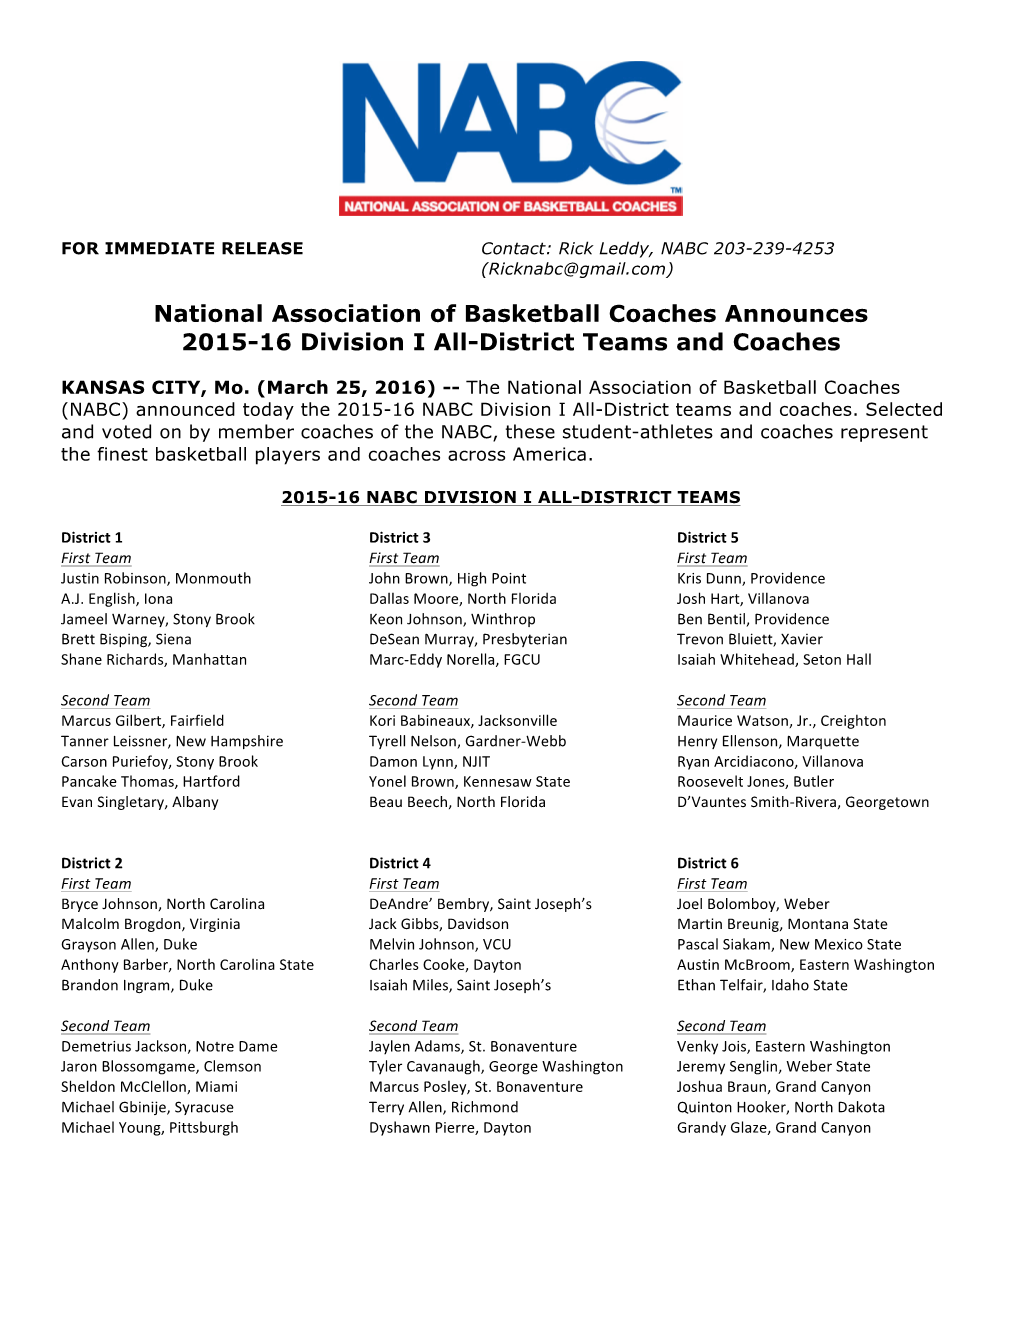 National Association of Basketball Coaches Announces 2015-16 Division I All-District Teams and Coaches